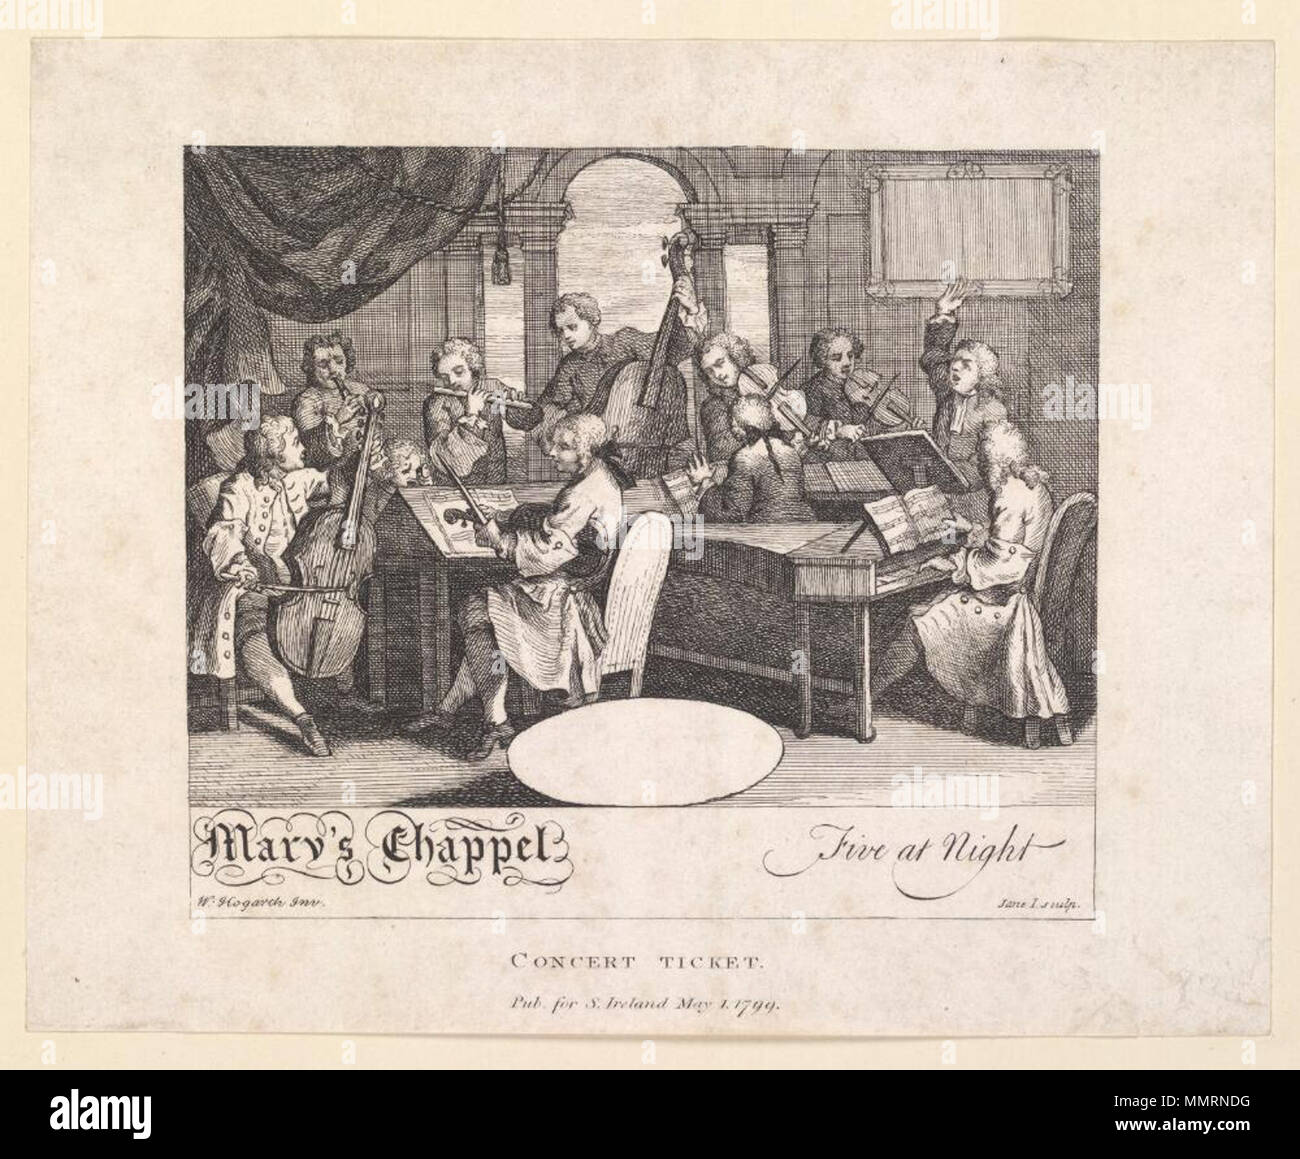 . Ticket of Mary's Chappel announcing Concert; 'five at night'; Concert; Concert ticket  Concert ticket. 1 May 1799. Mary's Chappel [author] Bodleian Libraries, Concert ticket Stock Photo